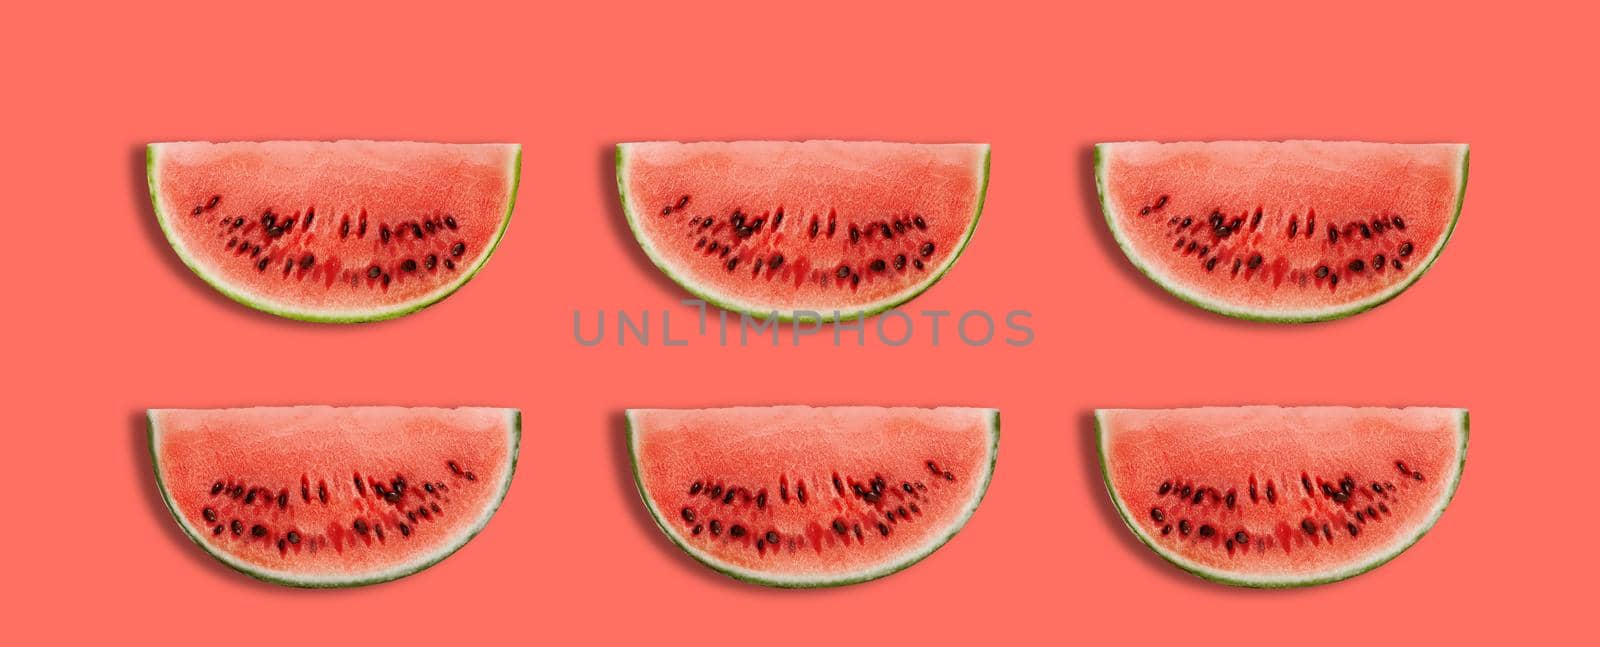 Six slices of watermelon, pink background with copy space for text, images. Cross-section. Berry with red flesh, black seeds. Side view. Close-up. by nazarovsergey